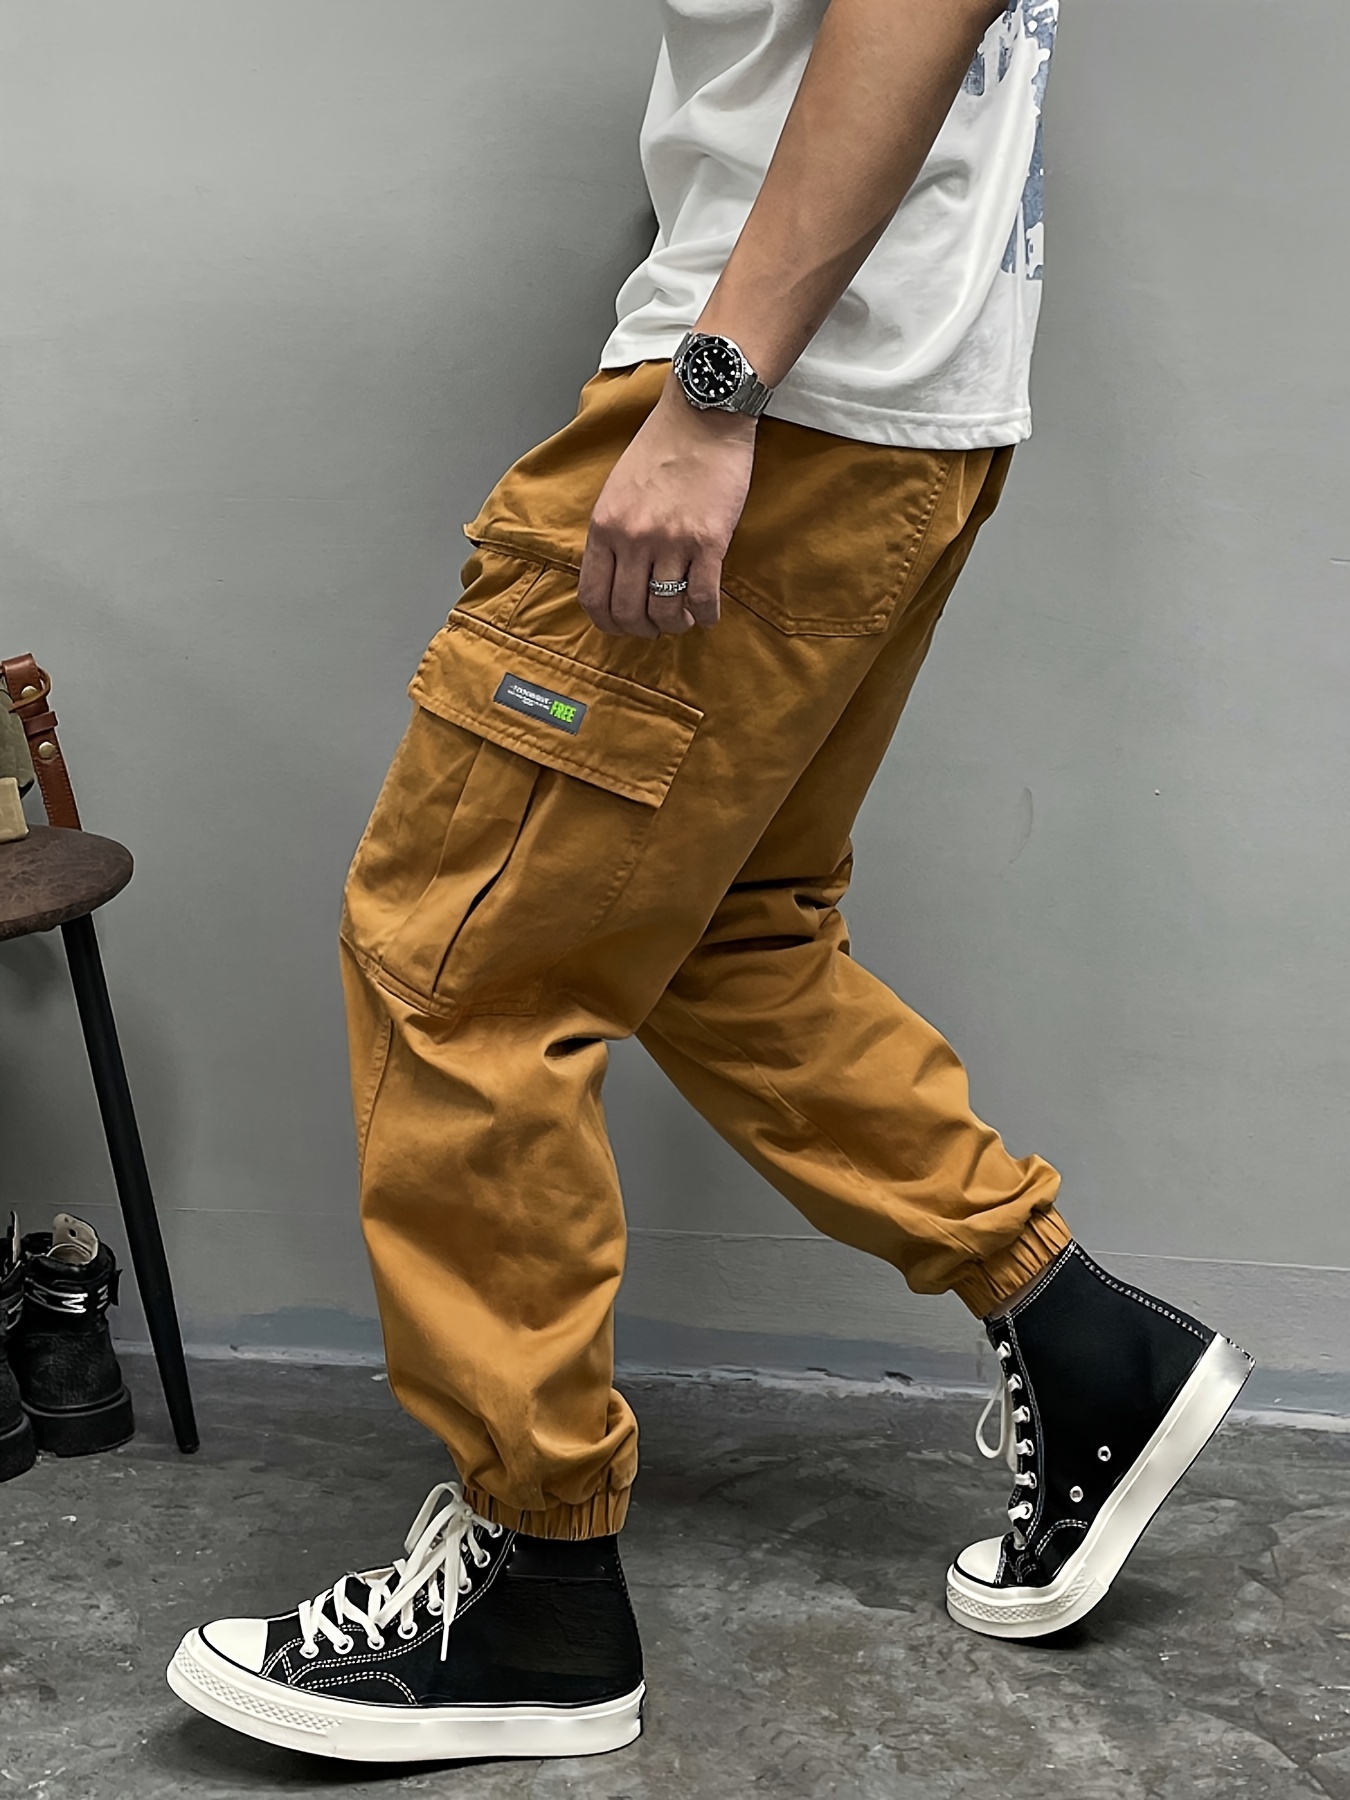 Cargo Pants Outfits for Men - 17 Ways to Wear Cargo Pants